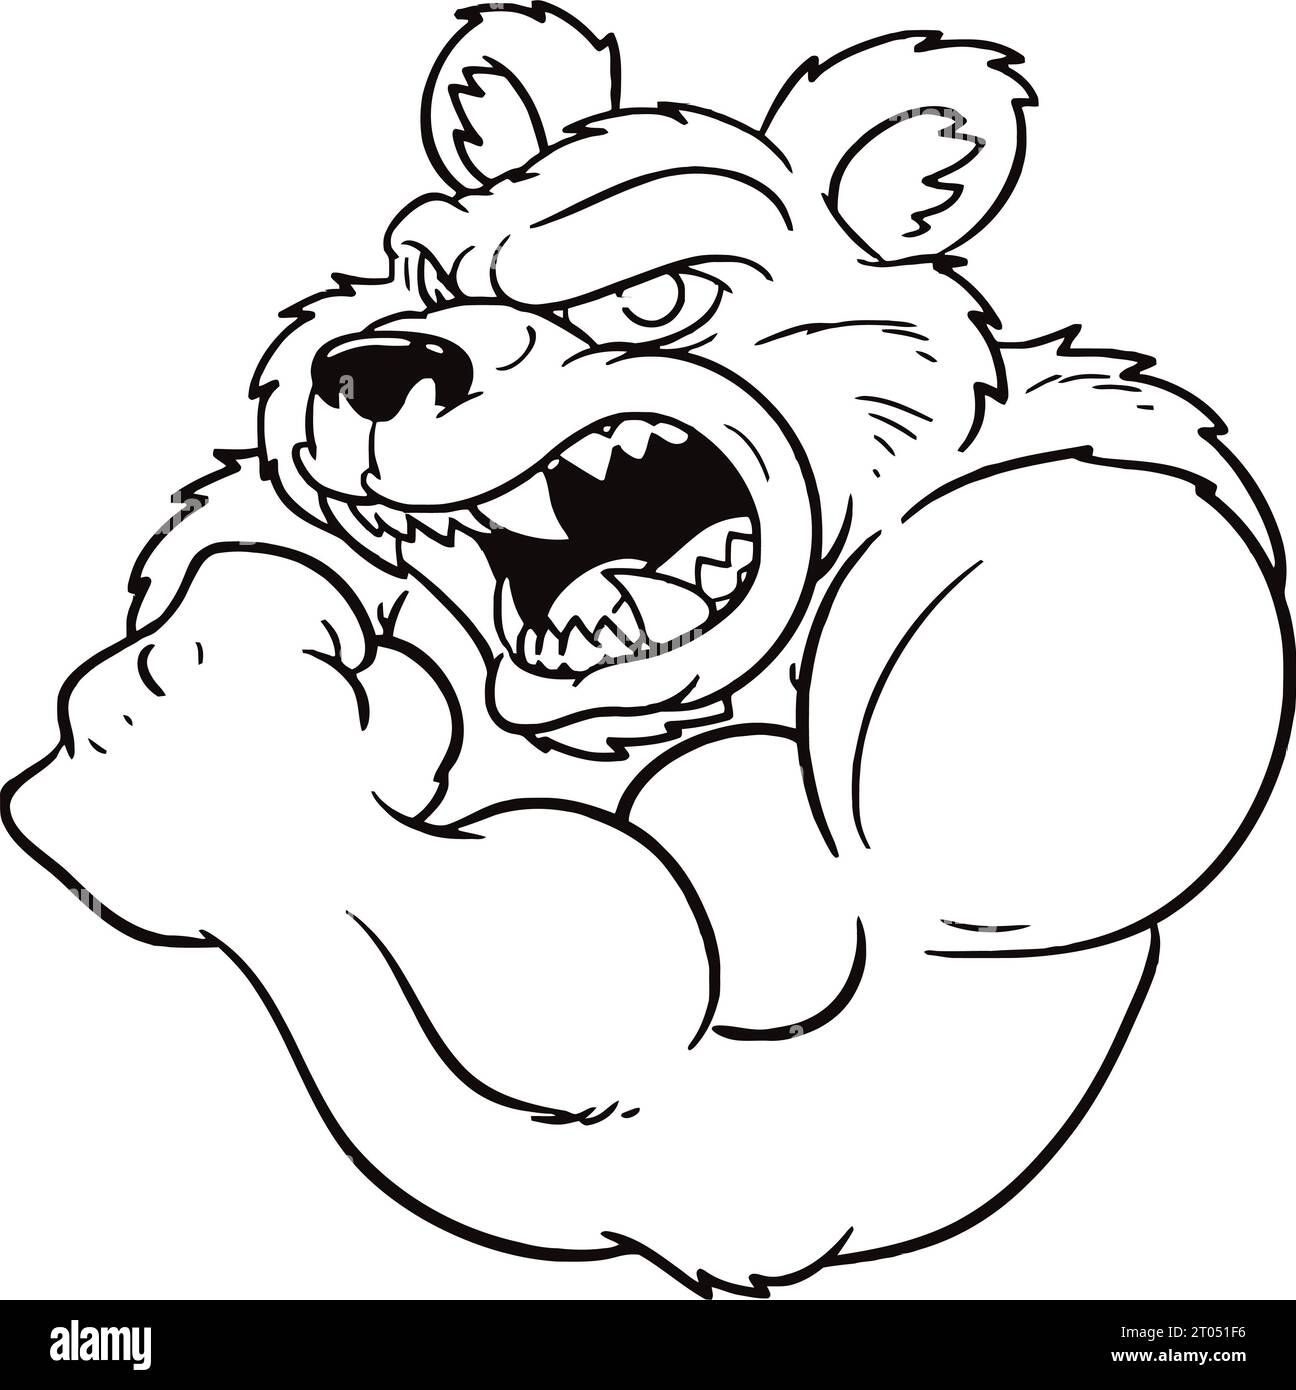 Angry cartoon bear Coloring page for kids & adult Stock Photo